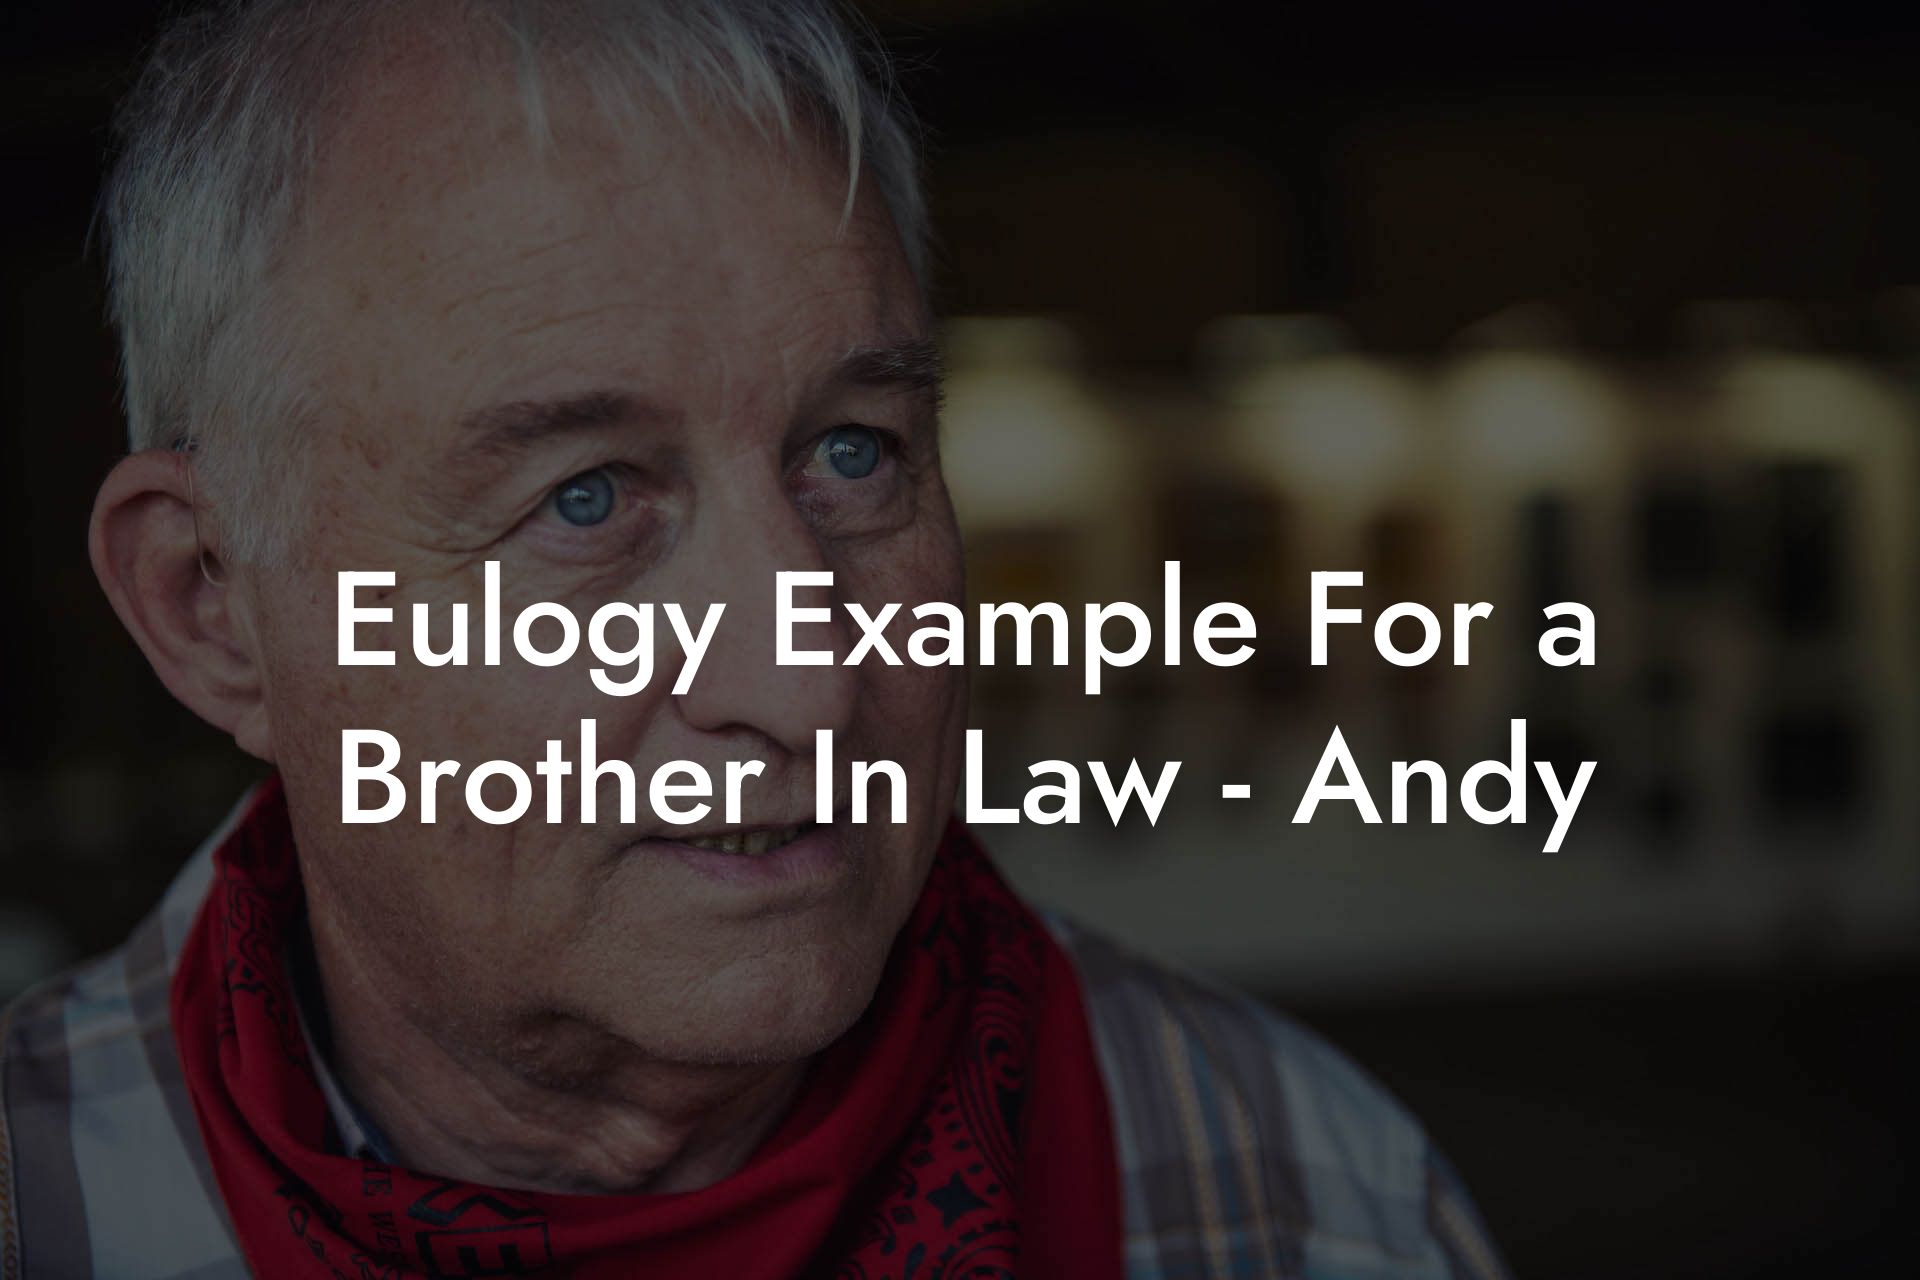 Eulogy Example For a Brother In Law - Andy